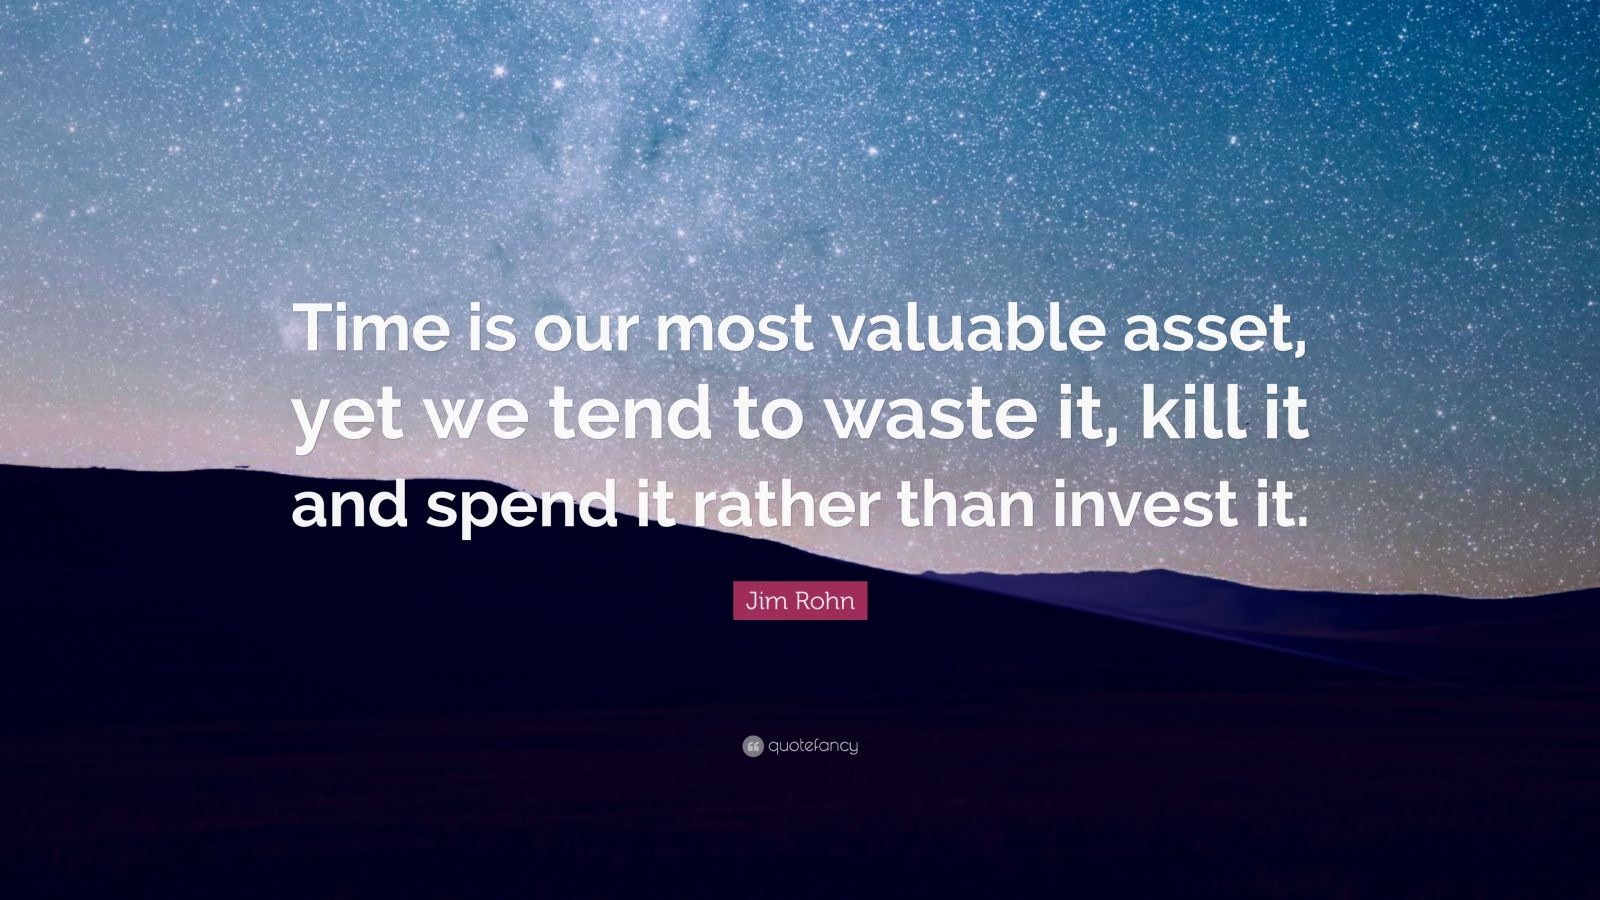 Jim Rohn Quote: “Time is our most valuable asset, yet we tend to waste